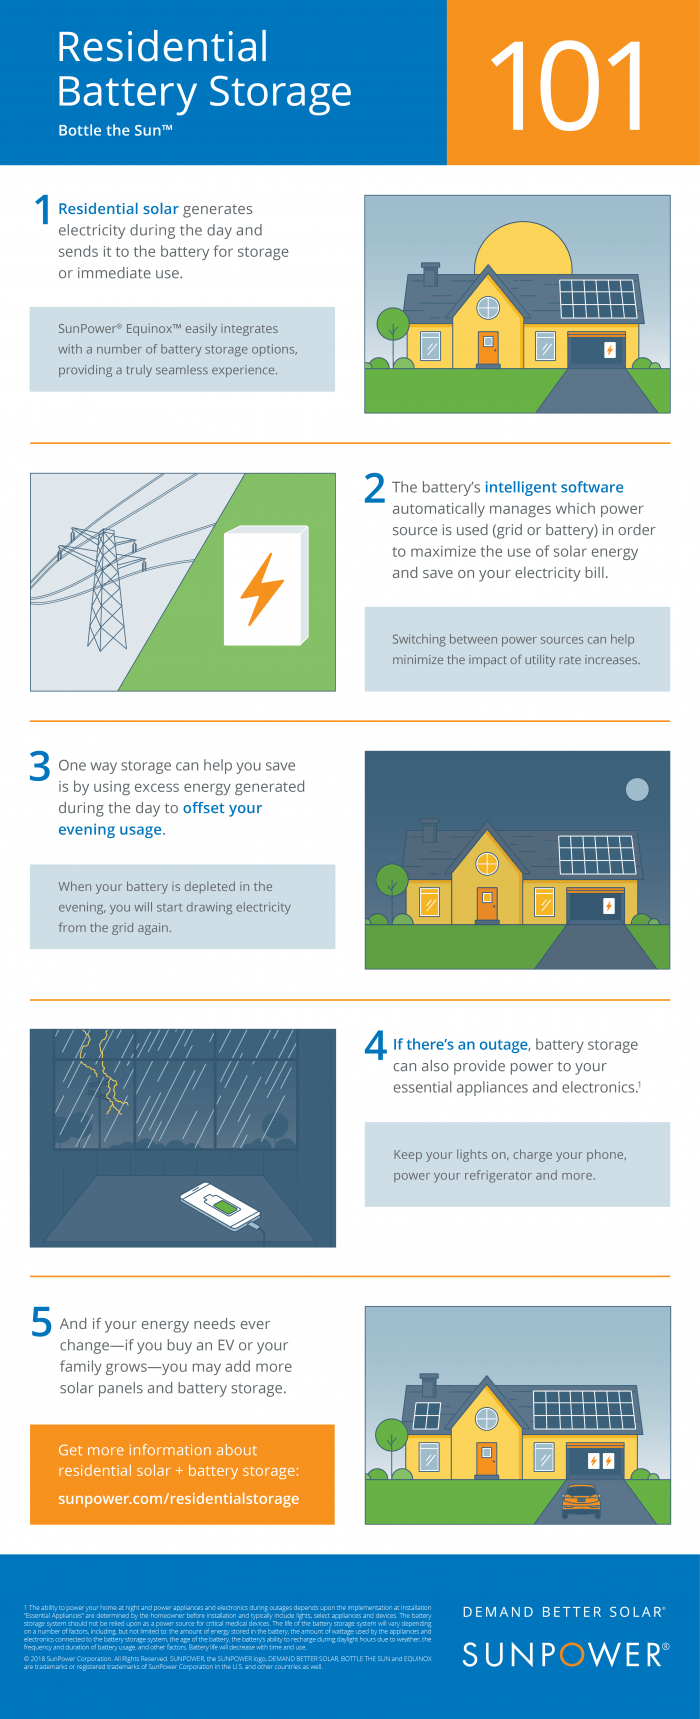 Learn how solar storage works in five easy steps.